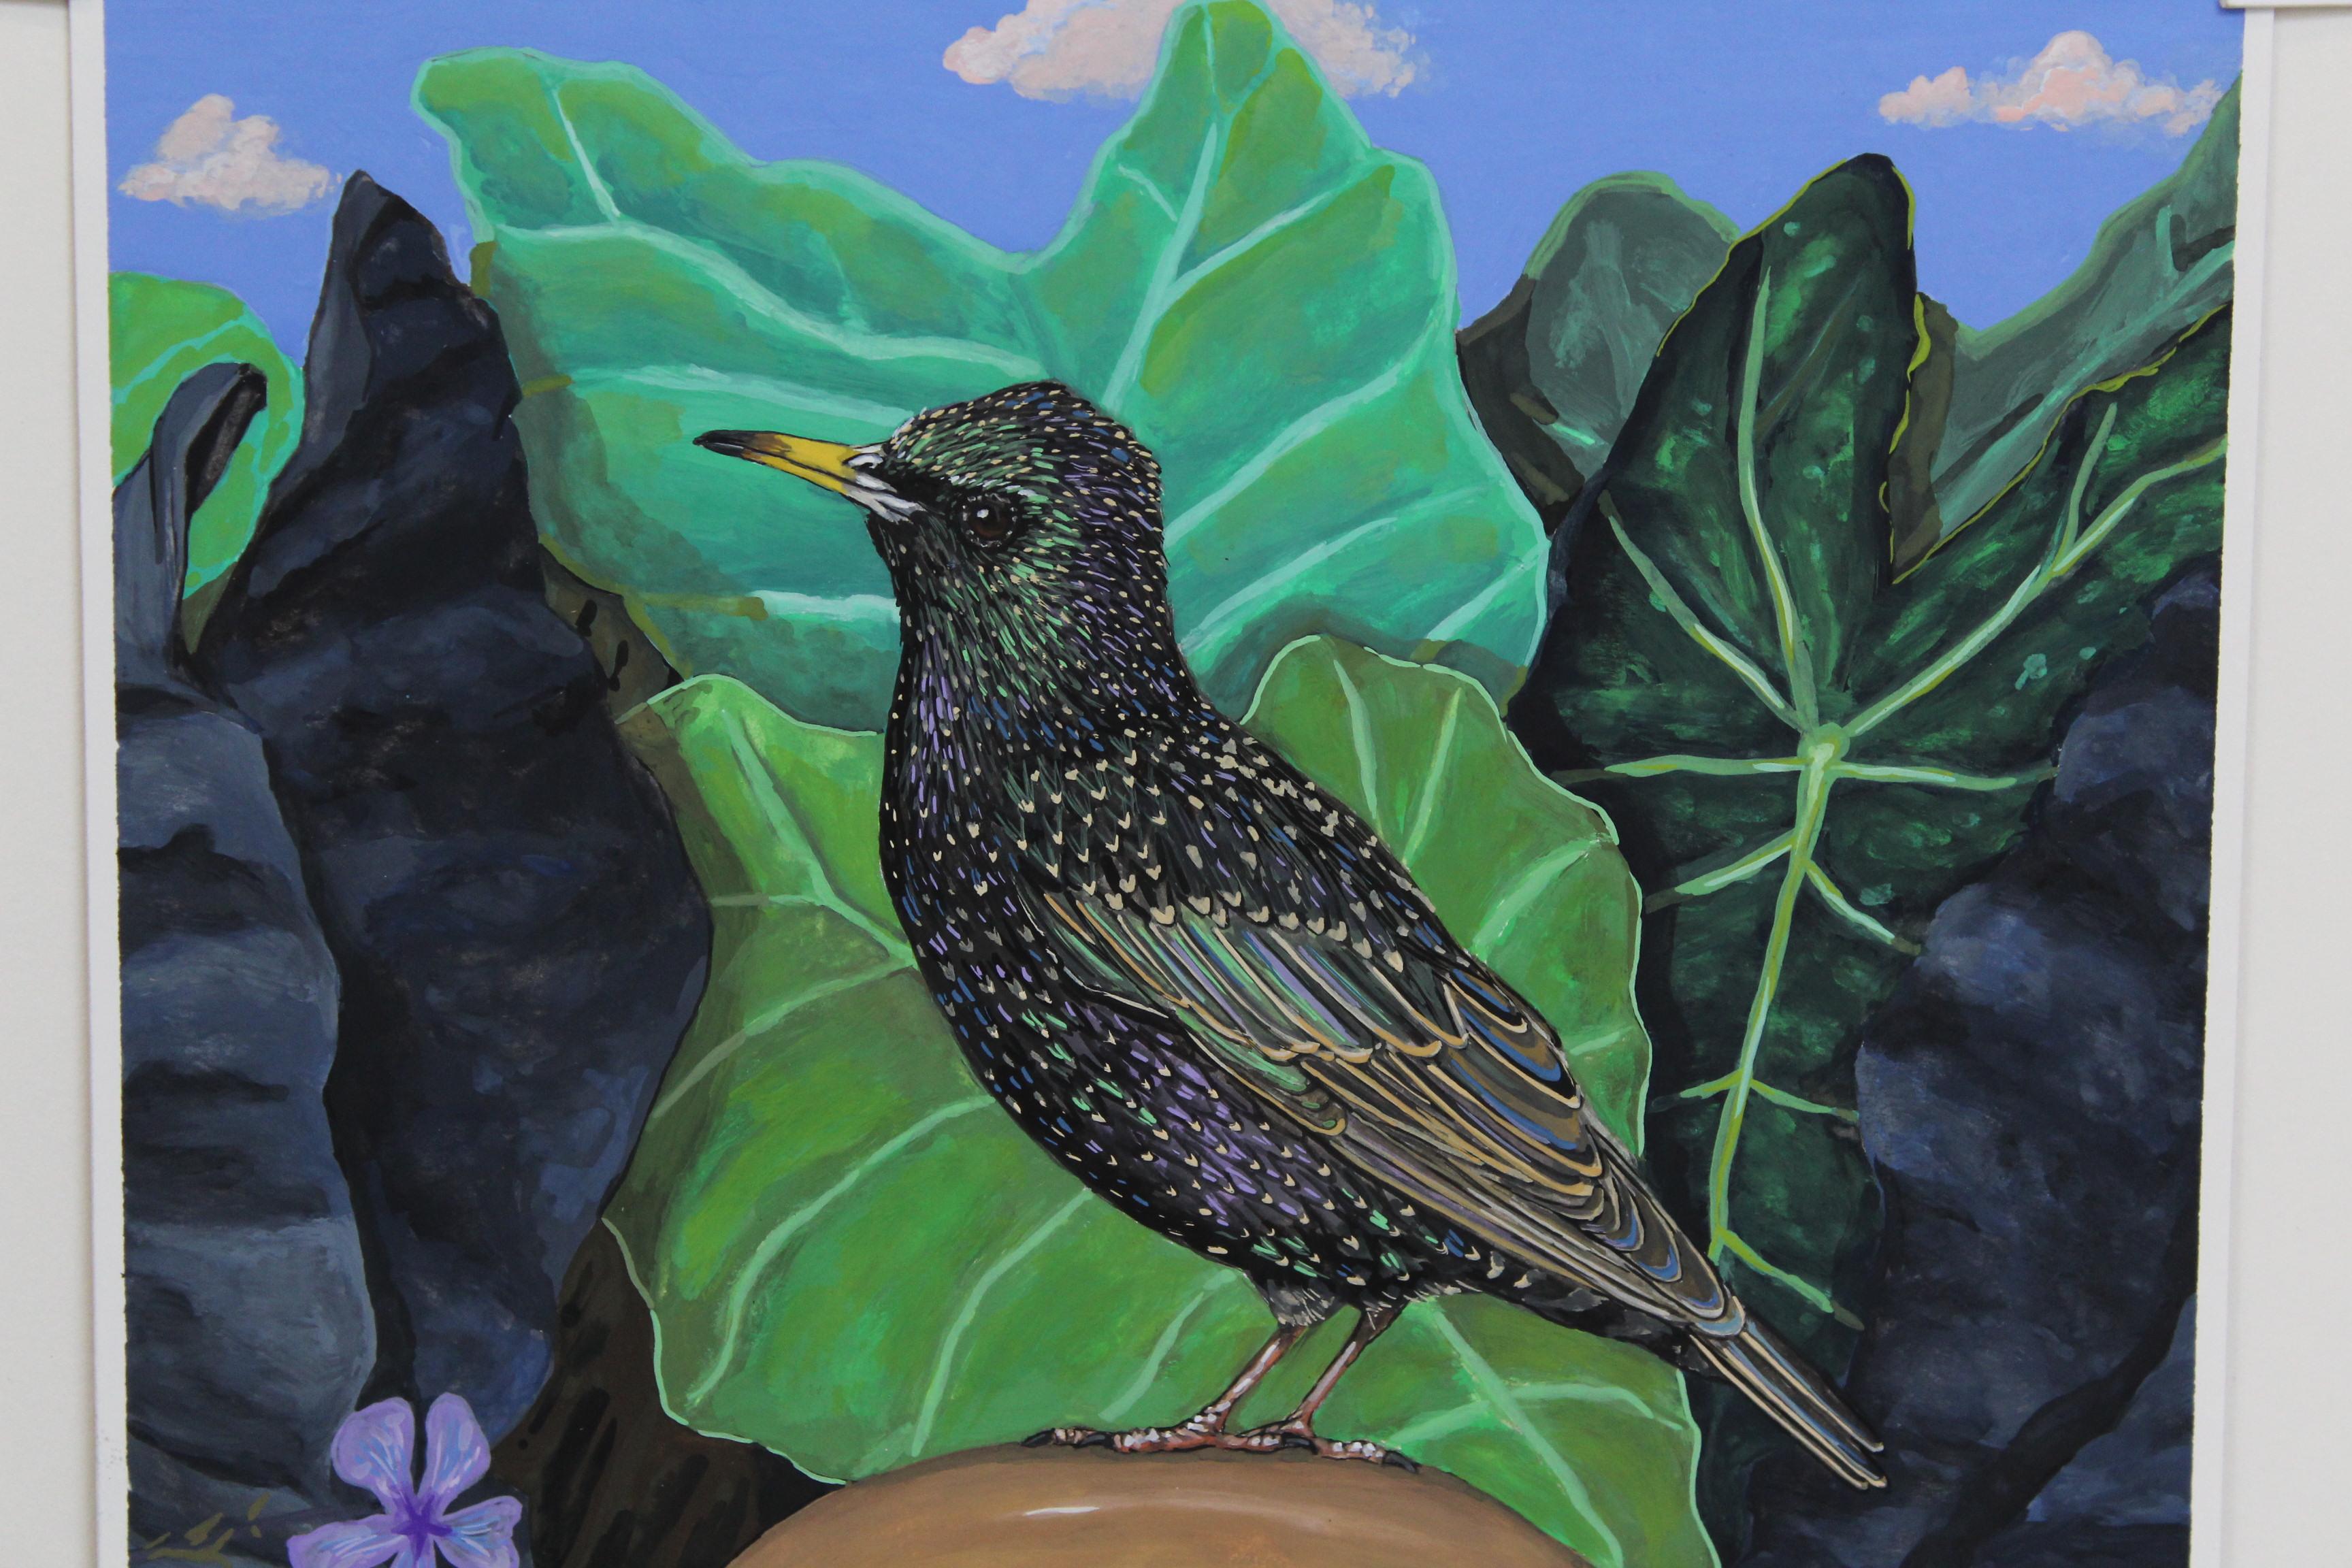 Starling on a Baconator - Painting by Jeff Pastorek